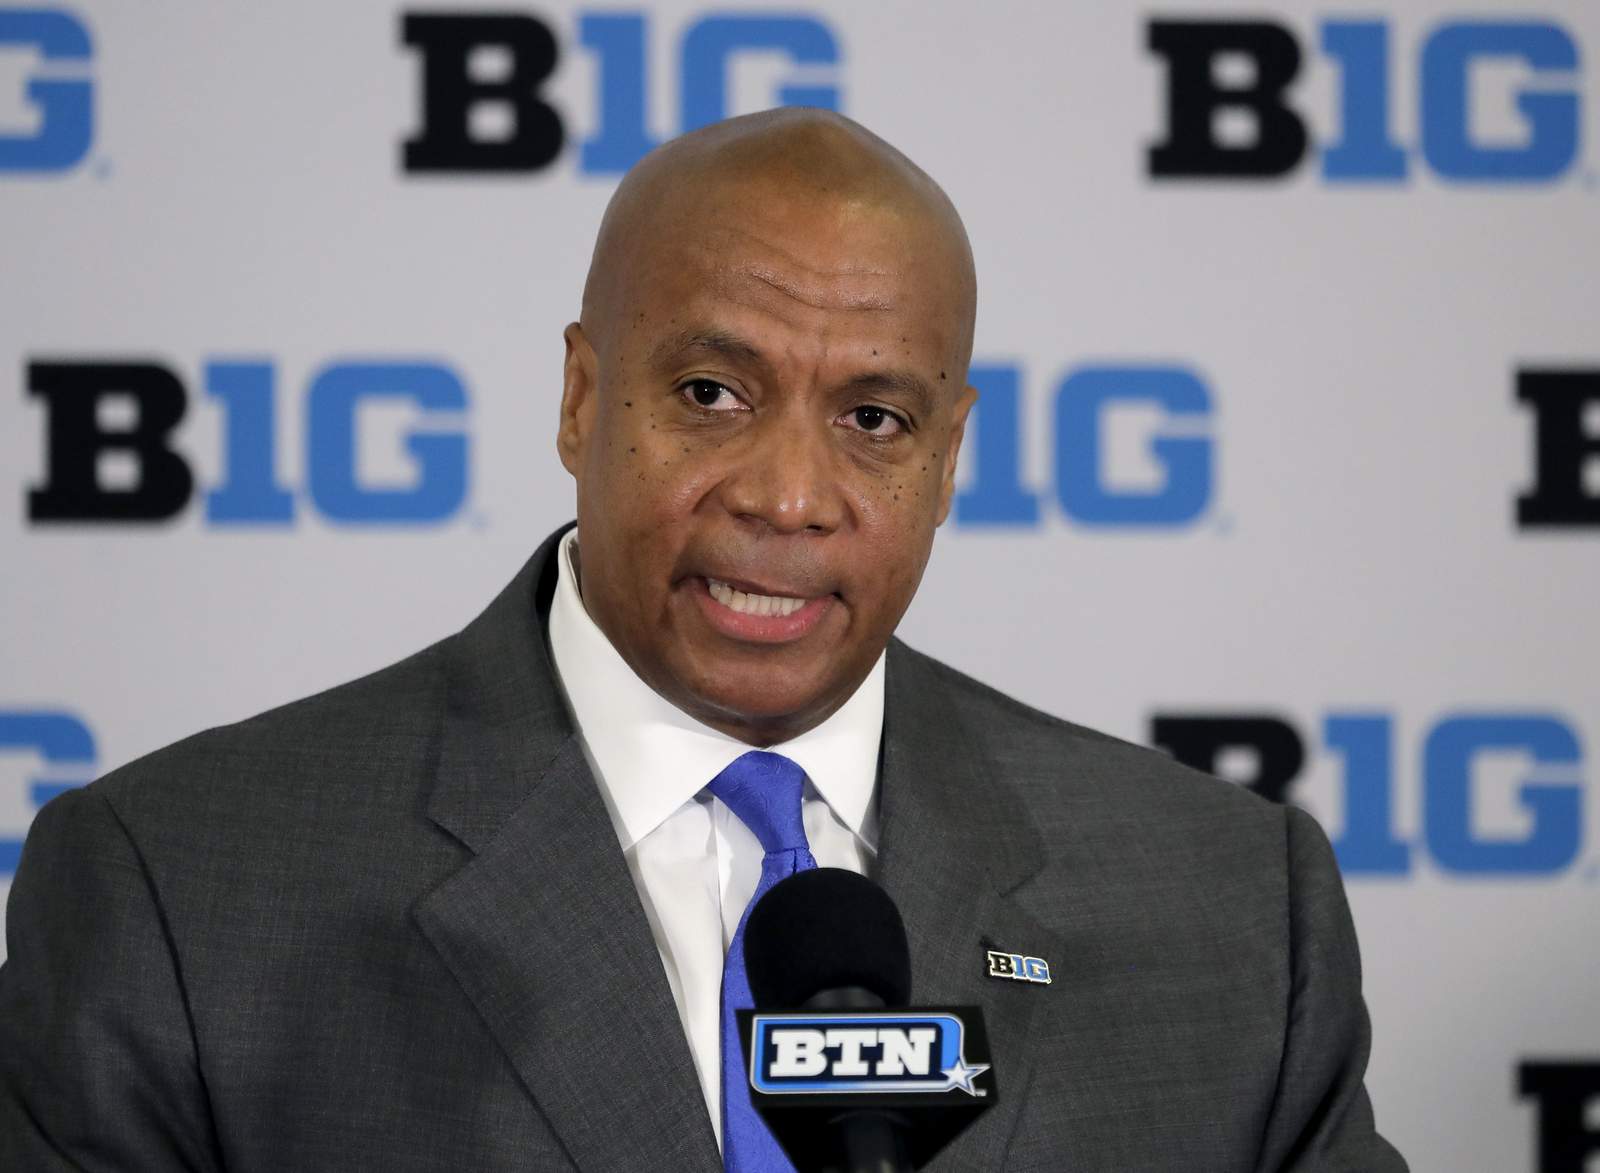 Big Ten changes course, aims for October start to football